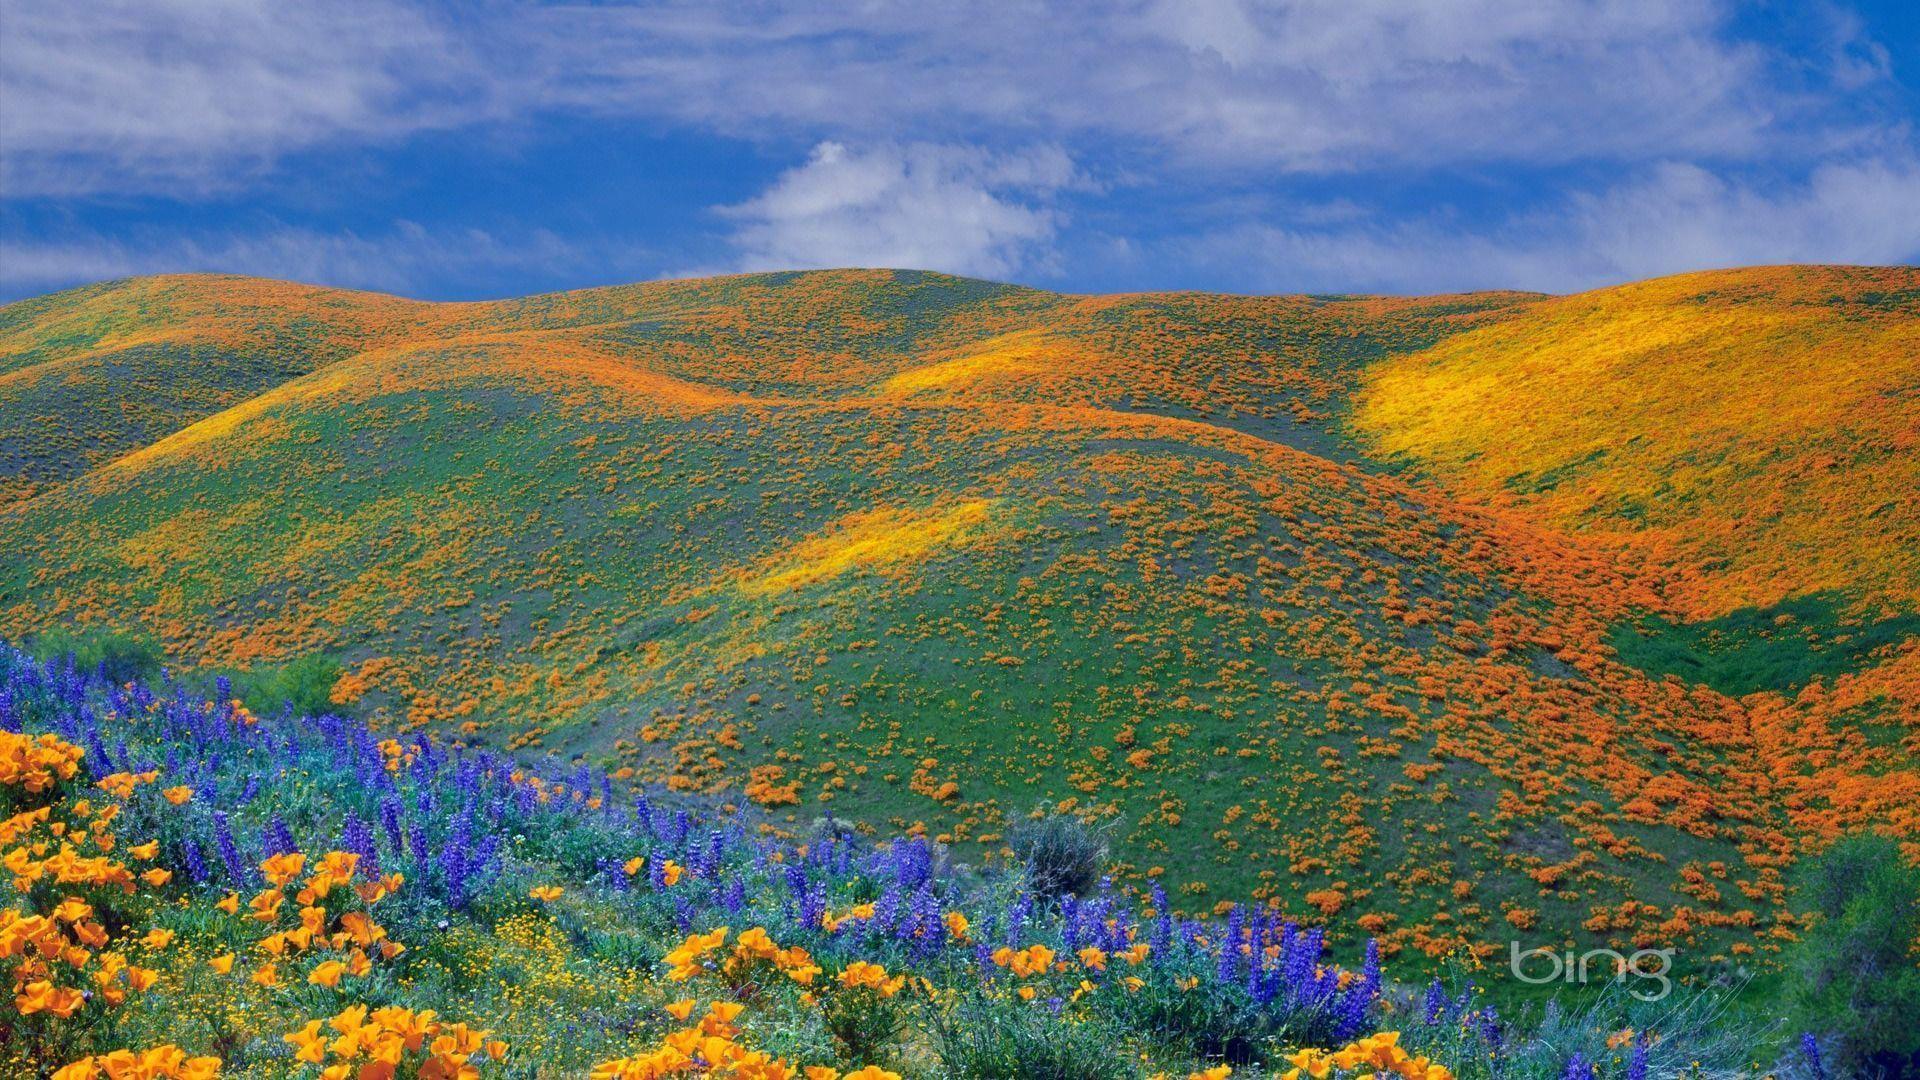 Spring wildflowers bloom all over the Antelope Valley California